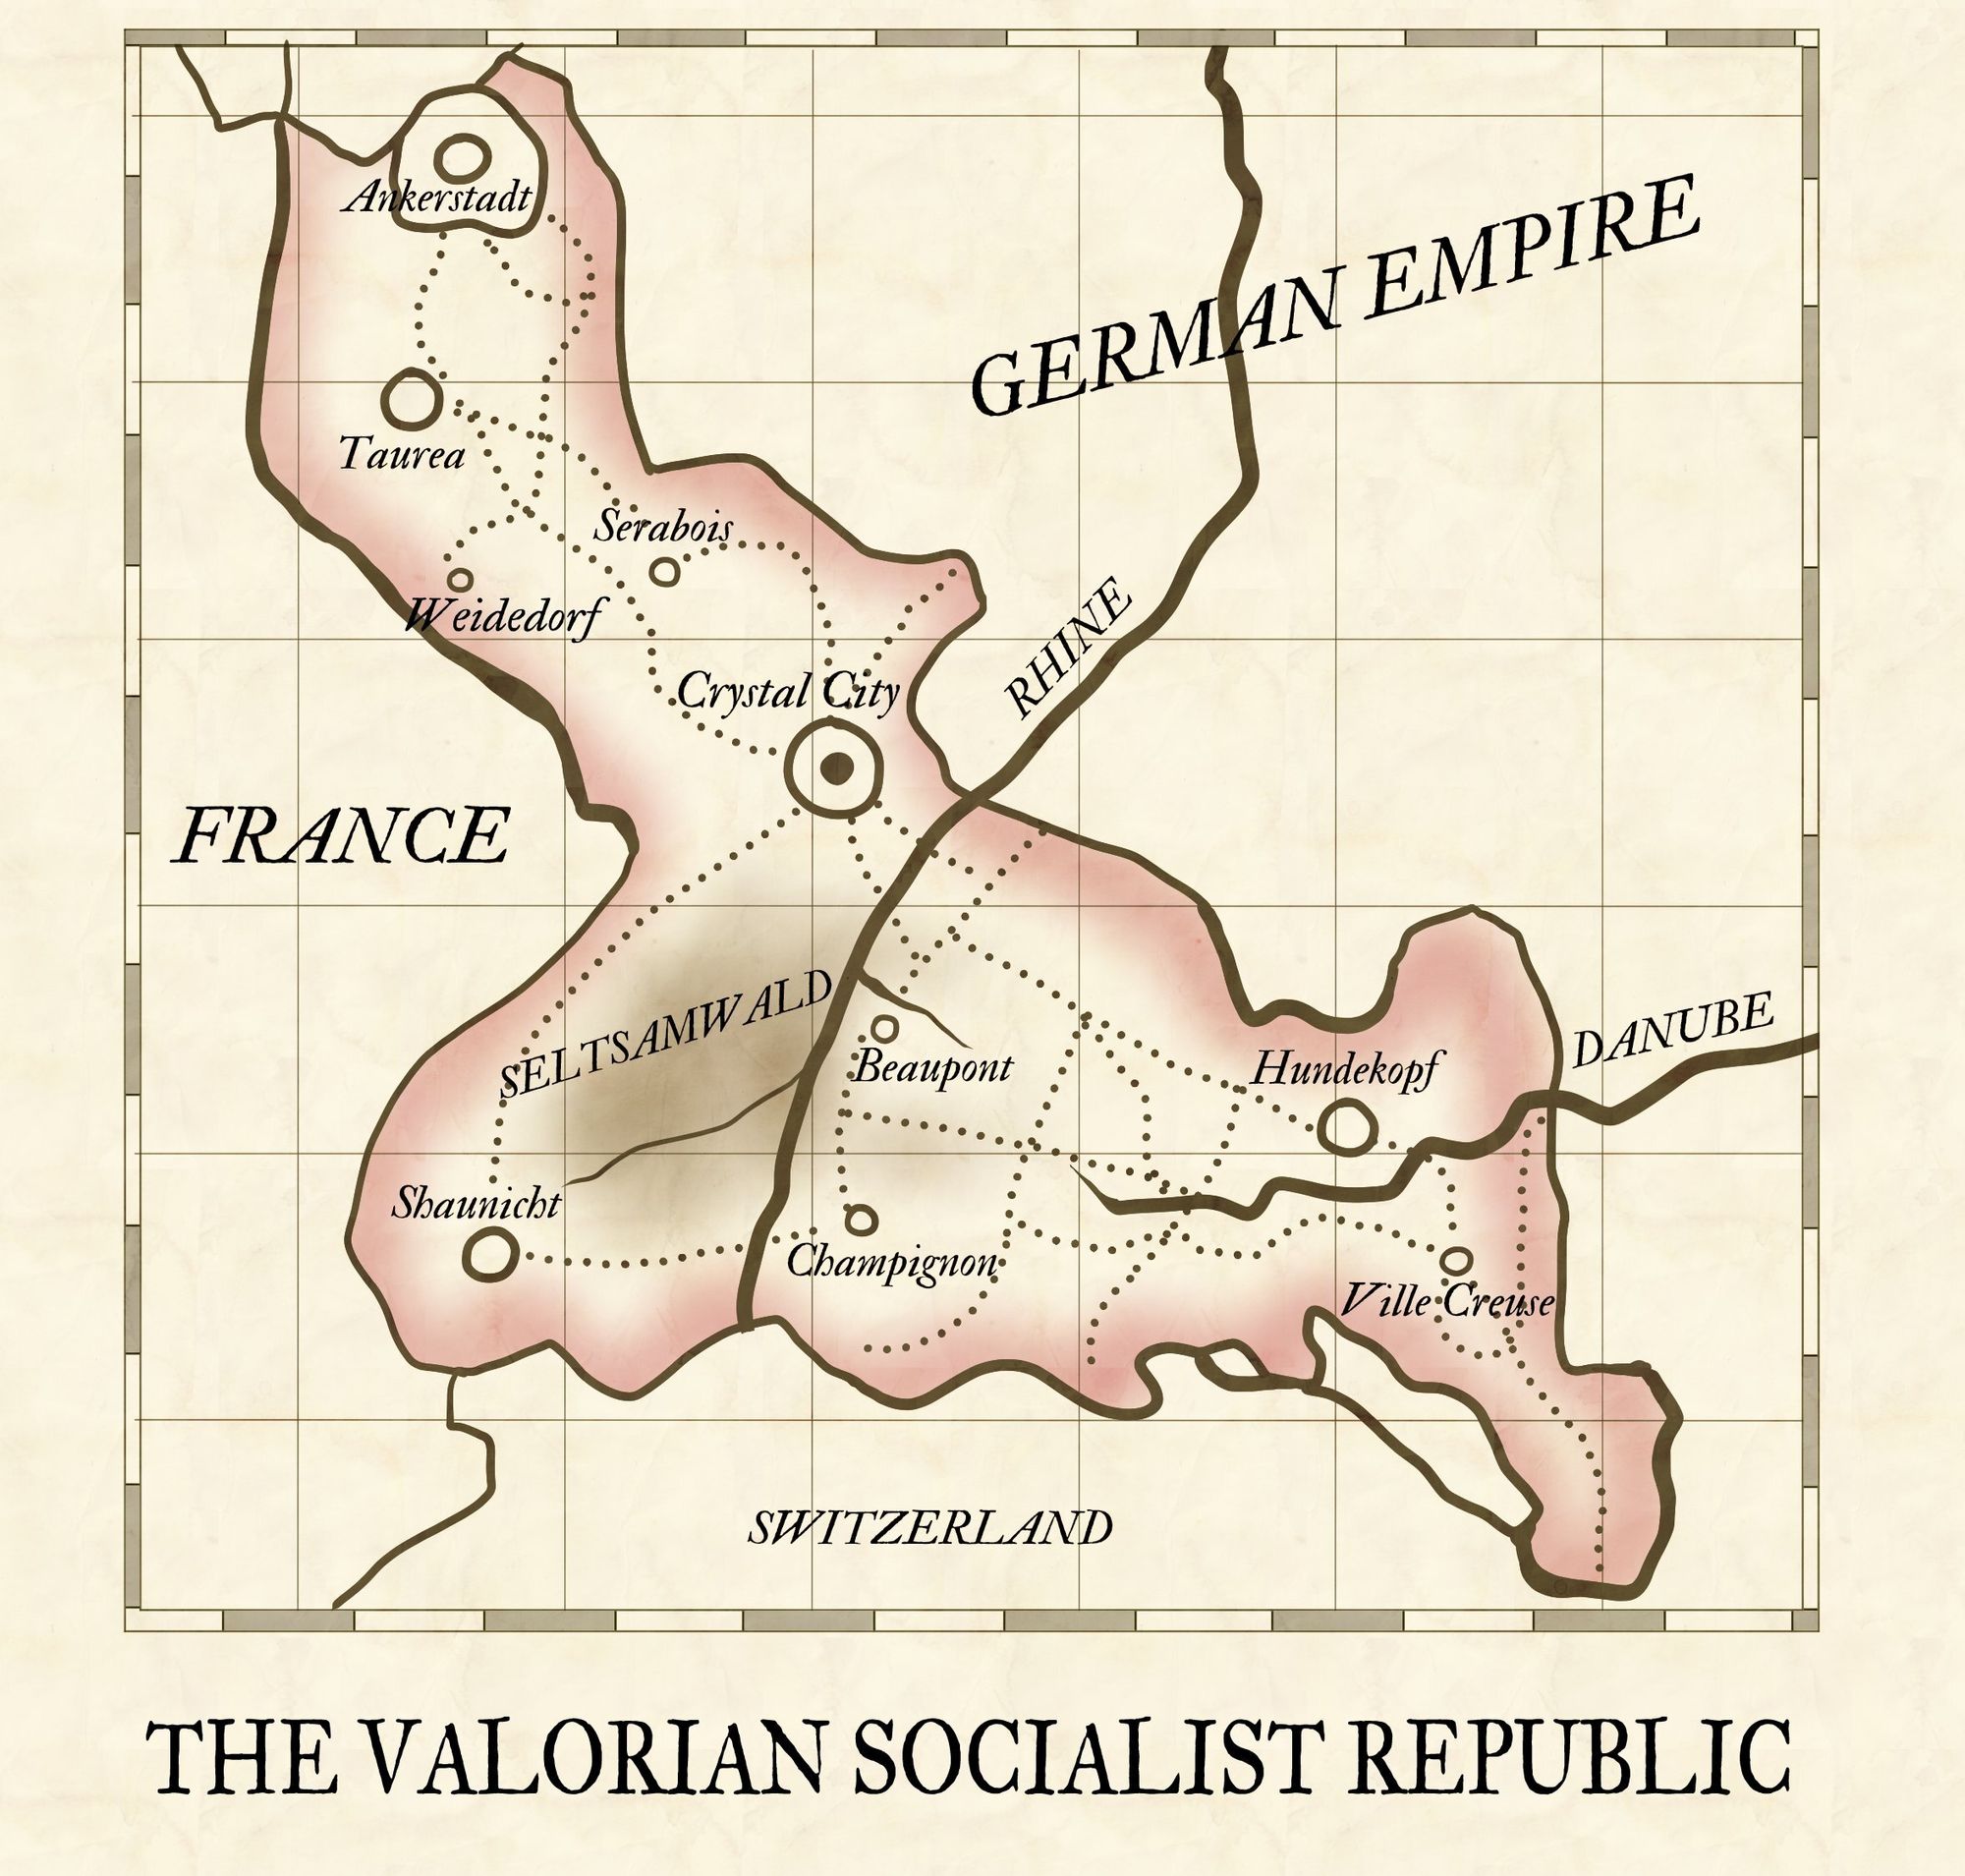 Map of the Valorian Socialist Republic. It is a small swatch of land in between France, the German Empire, and Switzerland. Its capital is Crystal City and both the Rhine and the Danube run through it. Other cities:  Ankerstadt, Taurea, Weidedorf, Serabois, Shaunicht, Champignon, Beaupont, Hundekopf, Ville Creuse. One patch of brown land next to Shaunicht is labeled Seltsamwald.